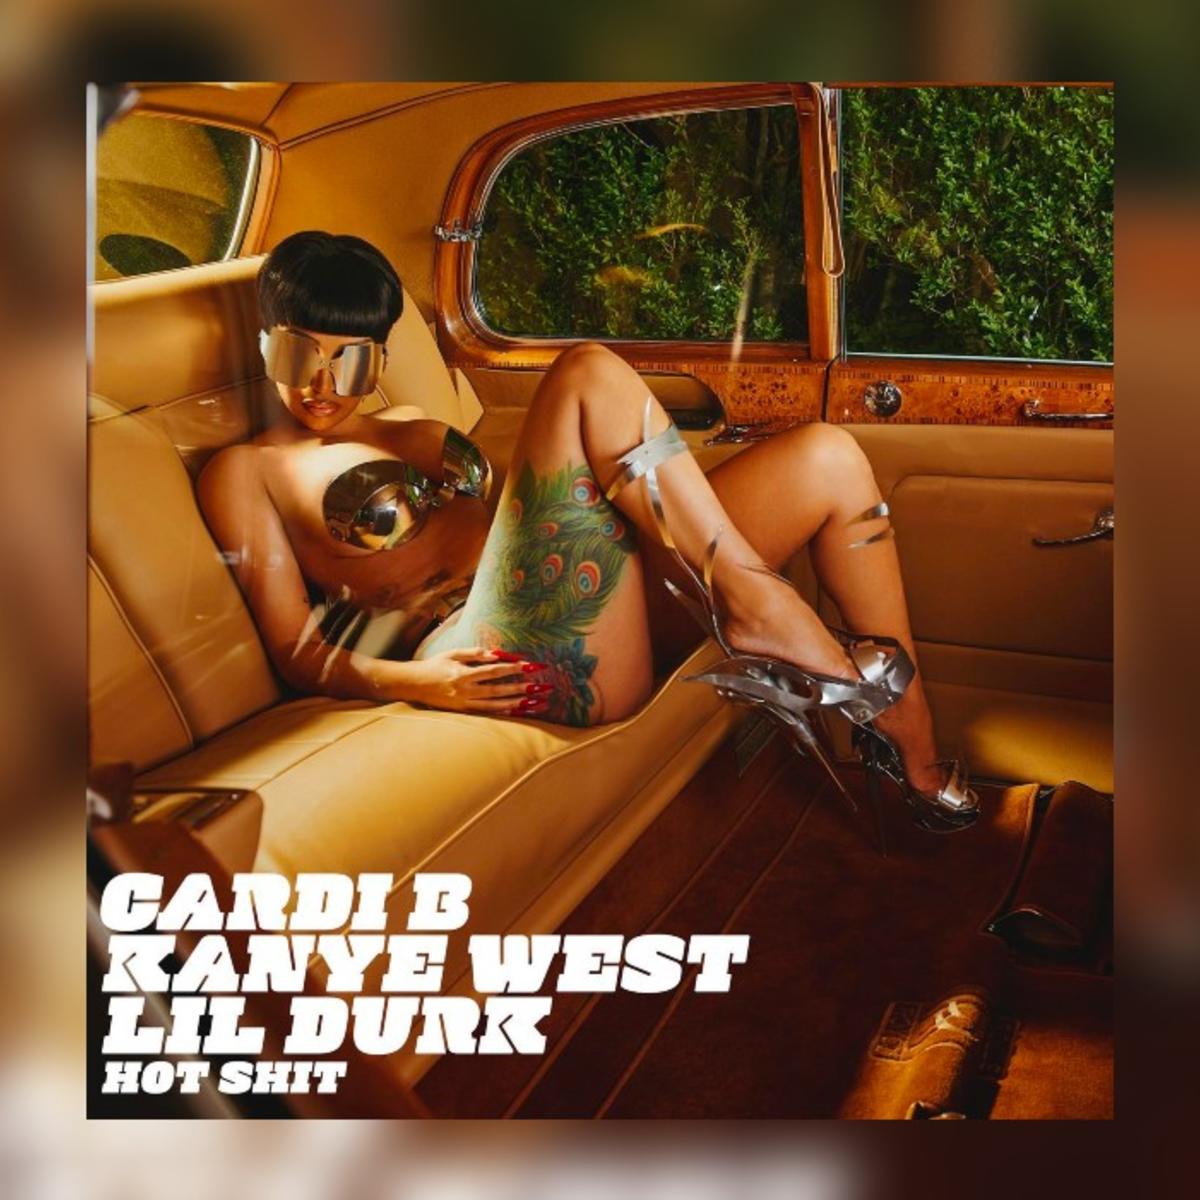 Cardi B Recruits Lil Durk & Kanye West For “Hot Shit”